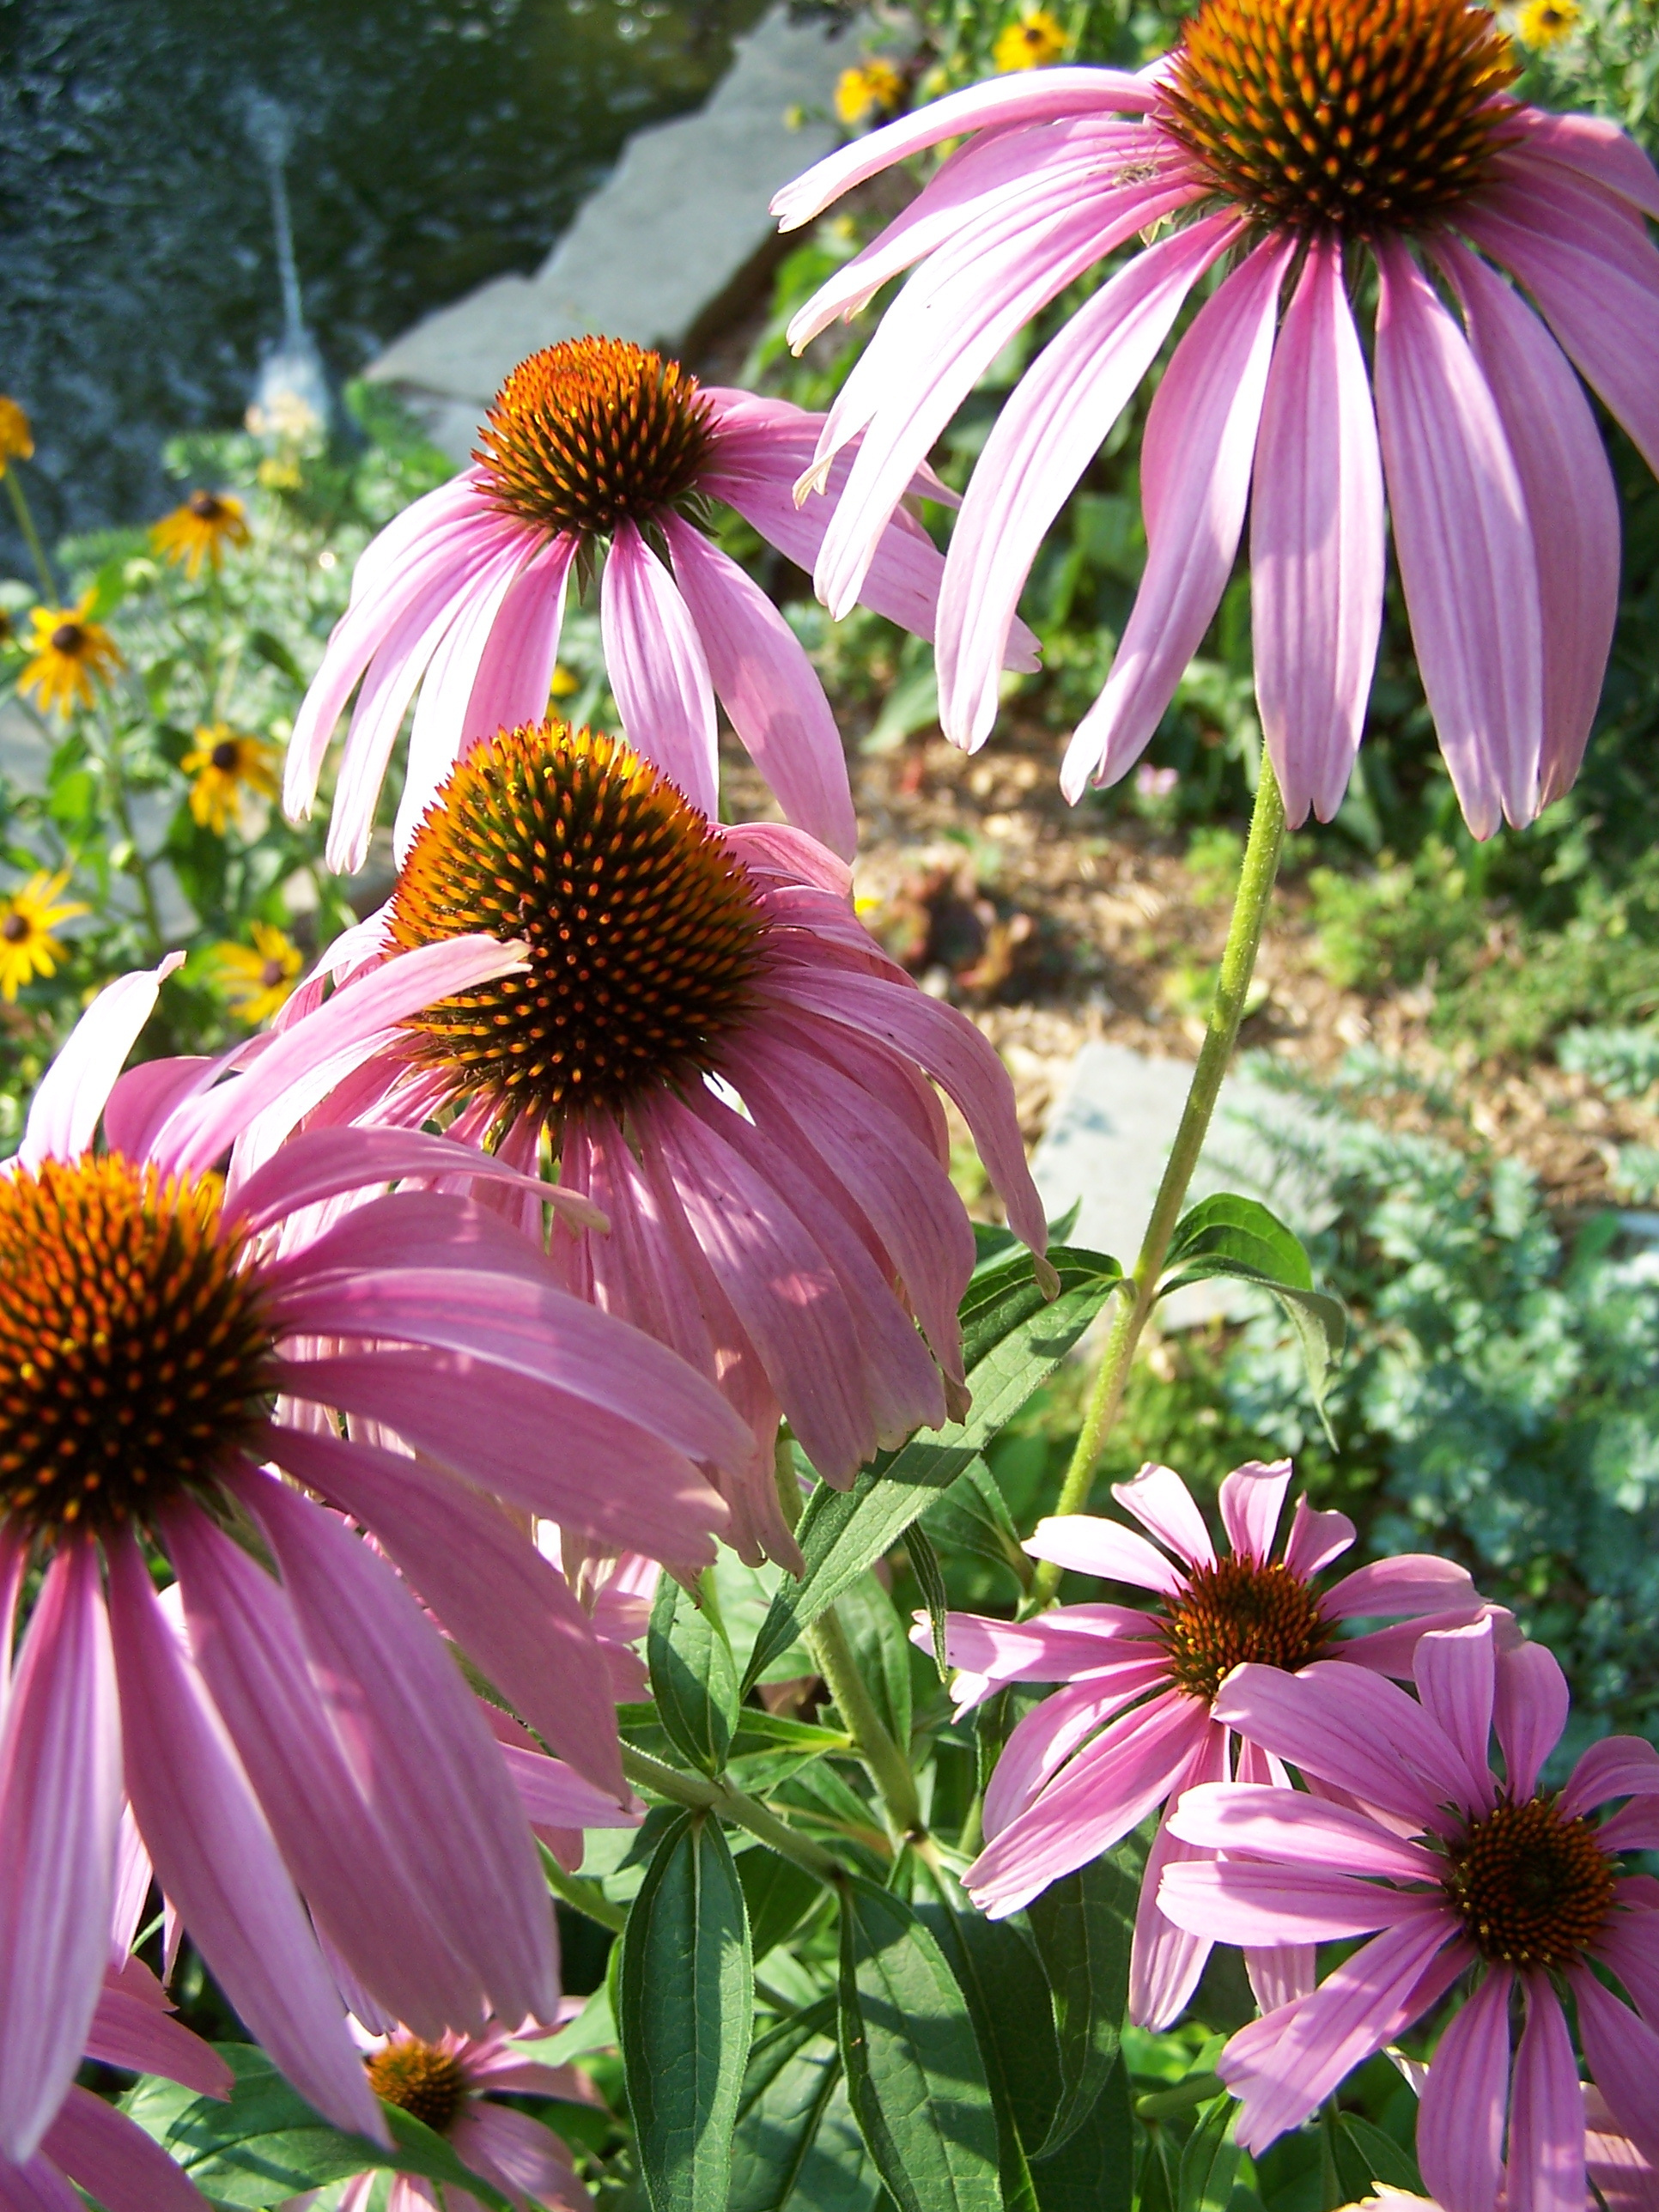 Cone flowers, Bloom, Blossom, Cone, Floral, HQ Photo